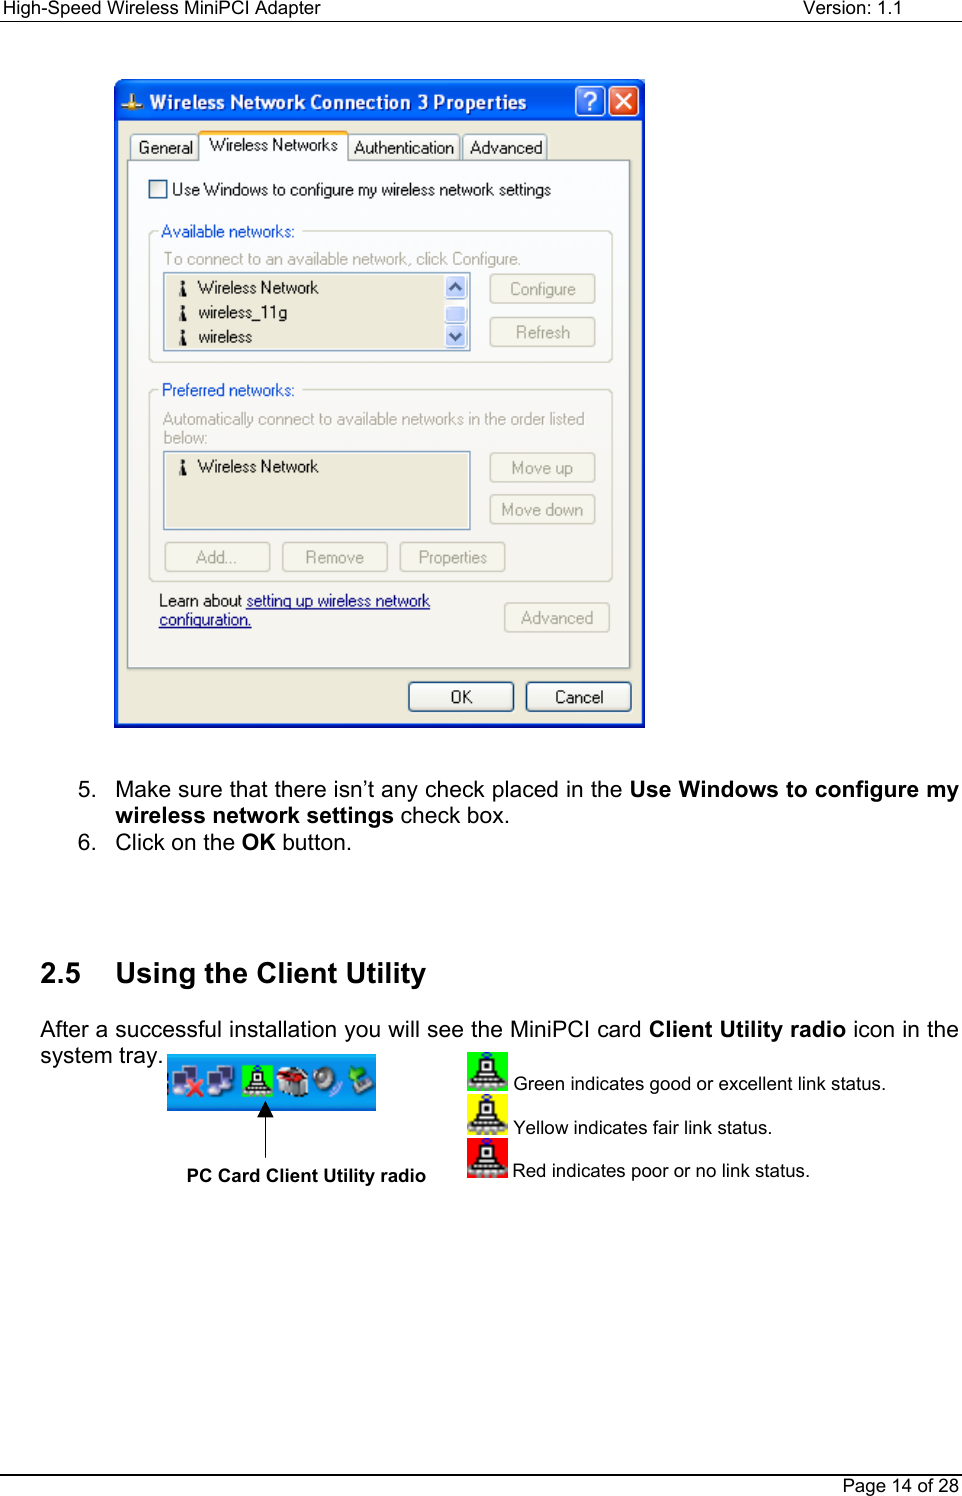 High-Speed Wireless MiniPCI Adapter Version: 1.1Page 14 of 285.  Make sure that there isn’t any check placed in the Use Windows to configure mywireless network settings check box.6.  Click on the OK button.2.5  Using the Client UtilityAfter a successful installation you will see the MiniPCI card Client Utility radio icon in thesystem tray.PC Card Client Utility radio Green indicates good or excellent link status. Yellow indicates fair link status. Red indicates poor or no link status.